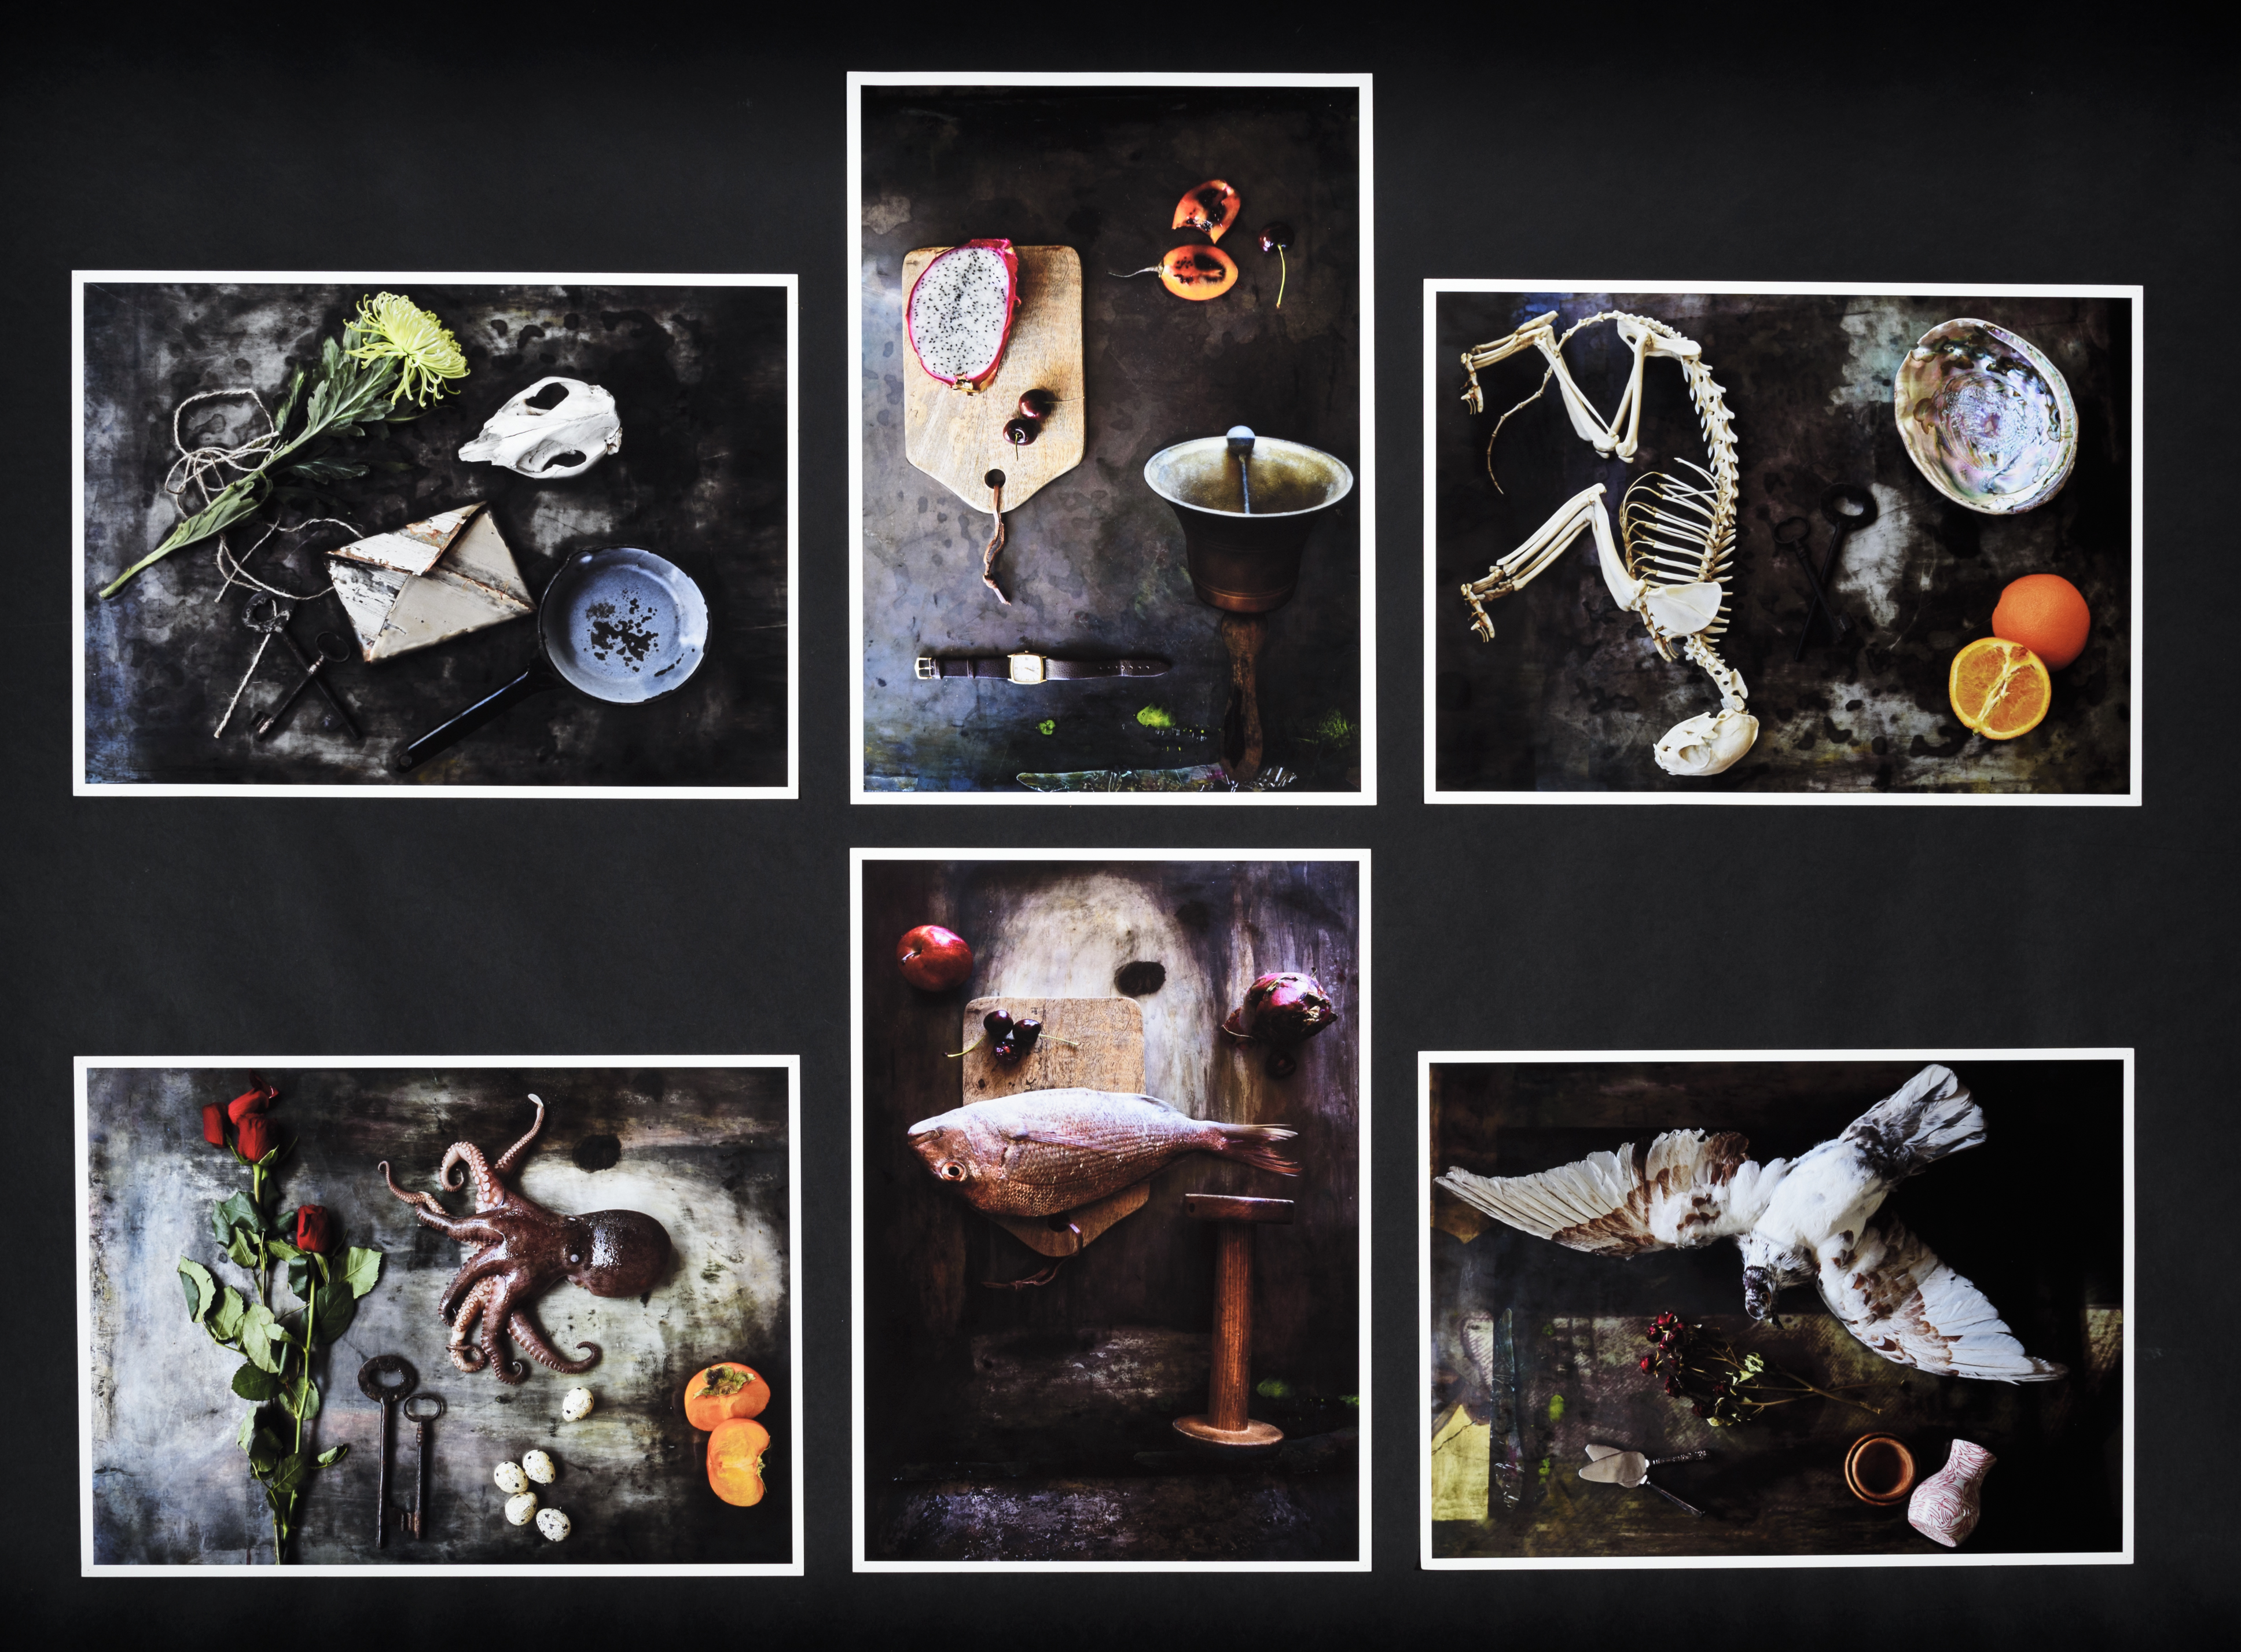 Six photographic works that show assemblages of fruits, flowers, dead animals and various objects.